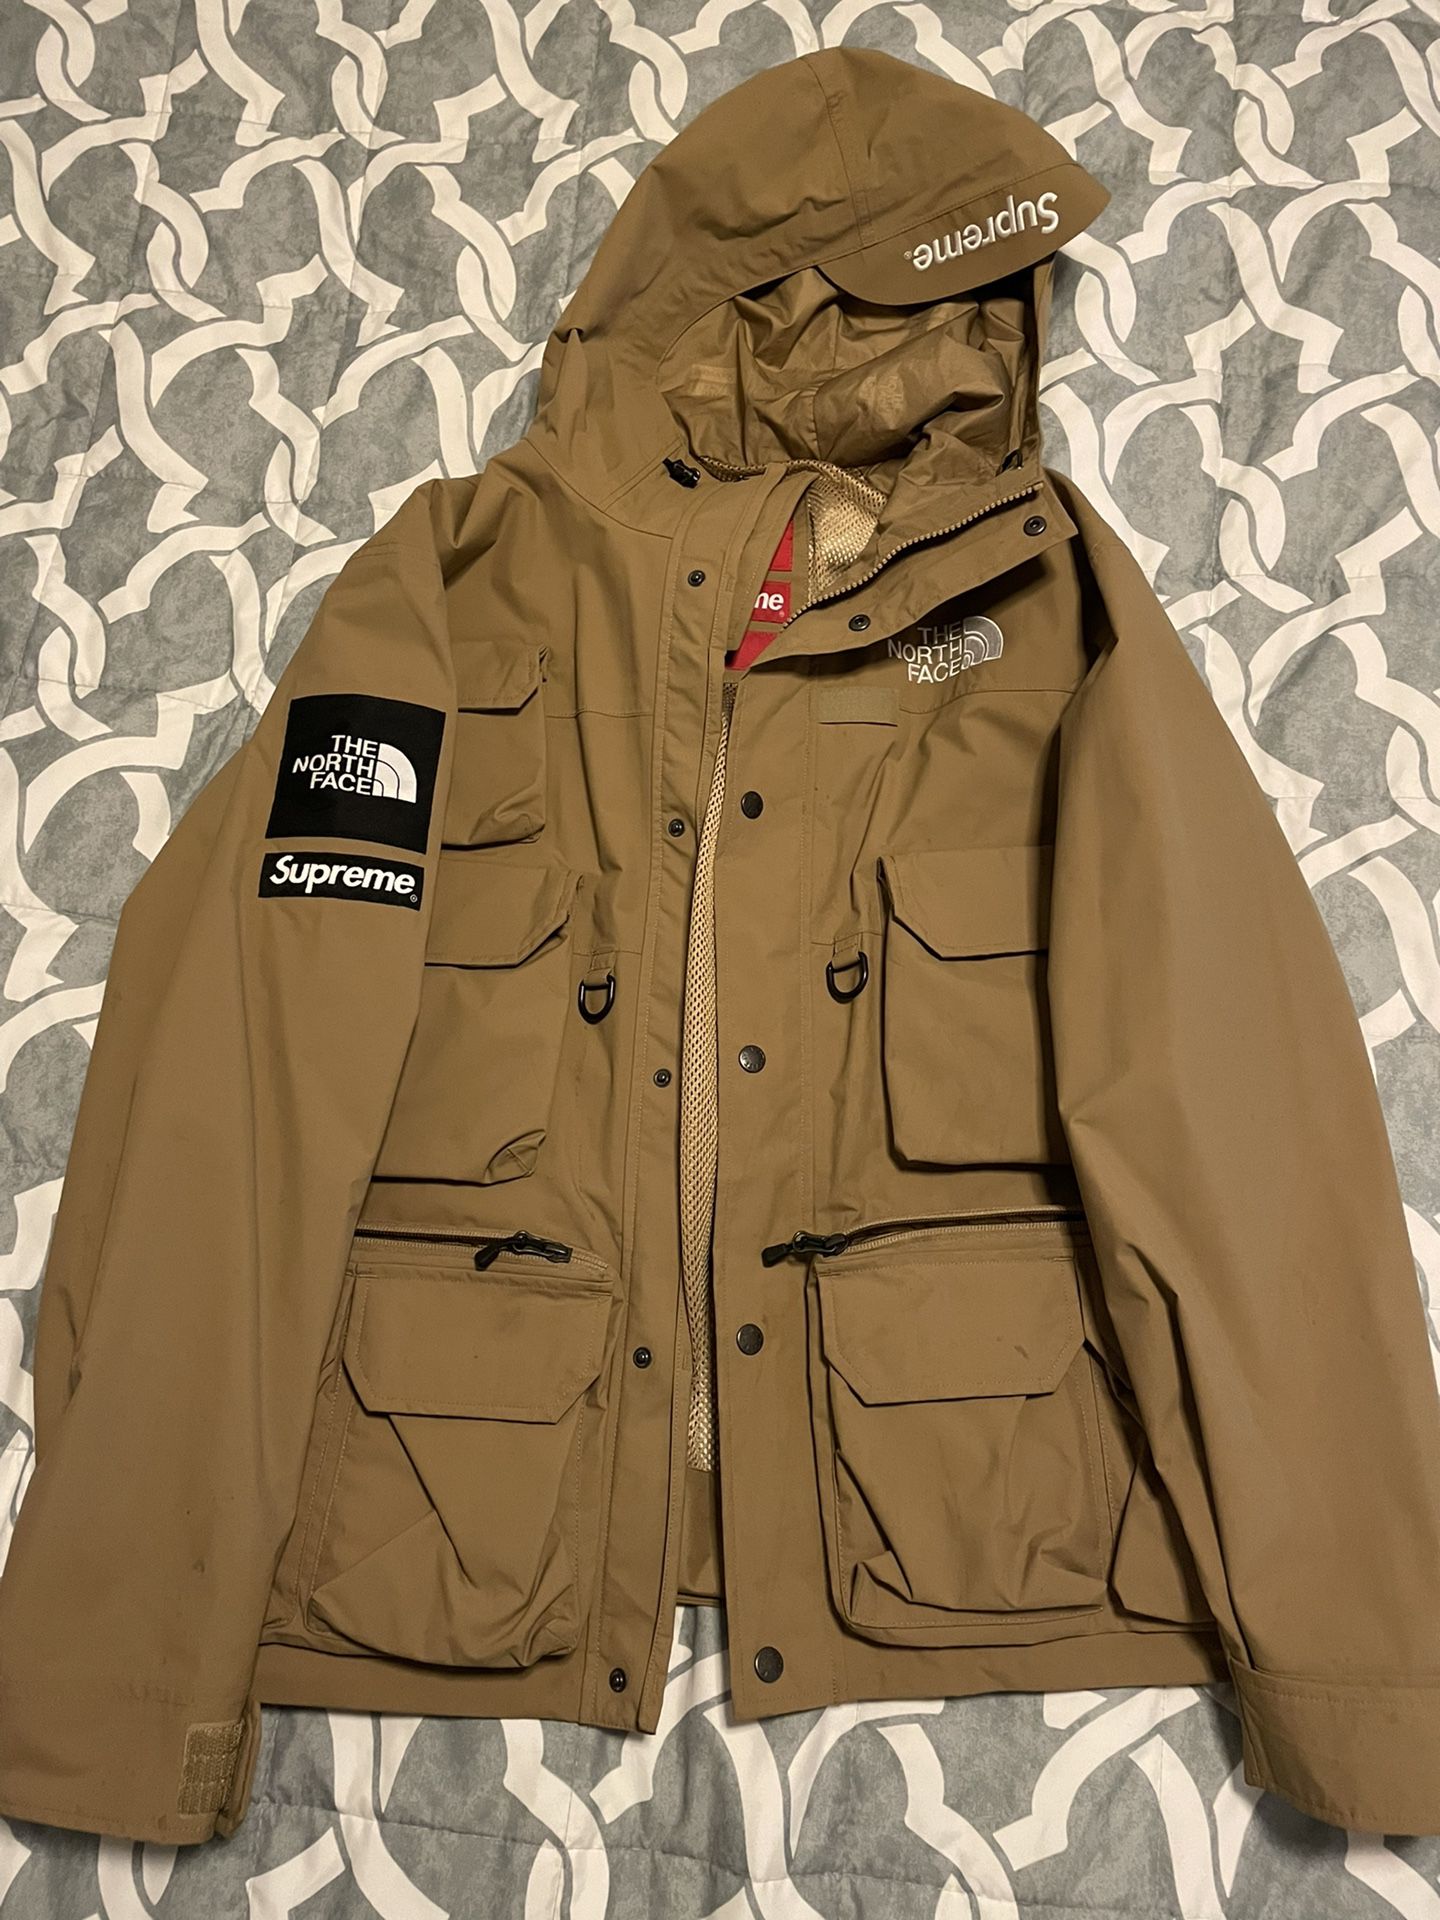 Supreme X The North face Cargo Jacket